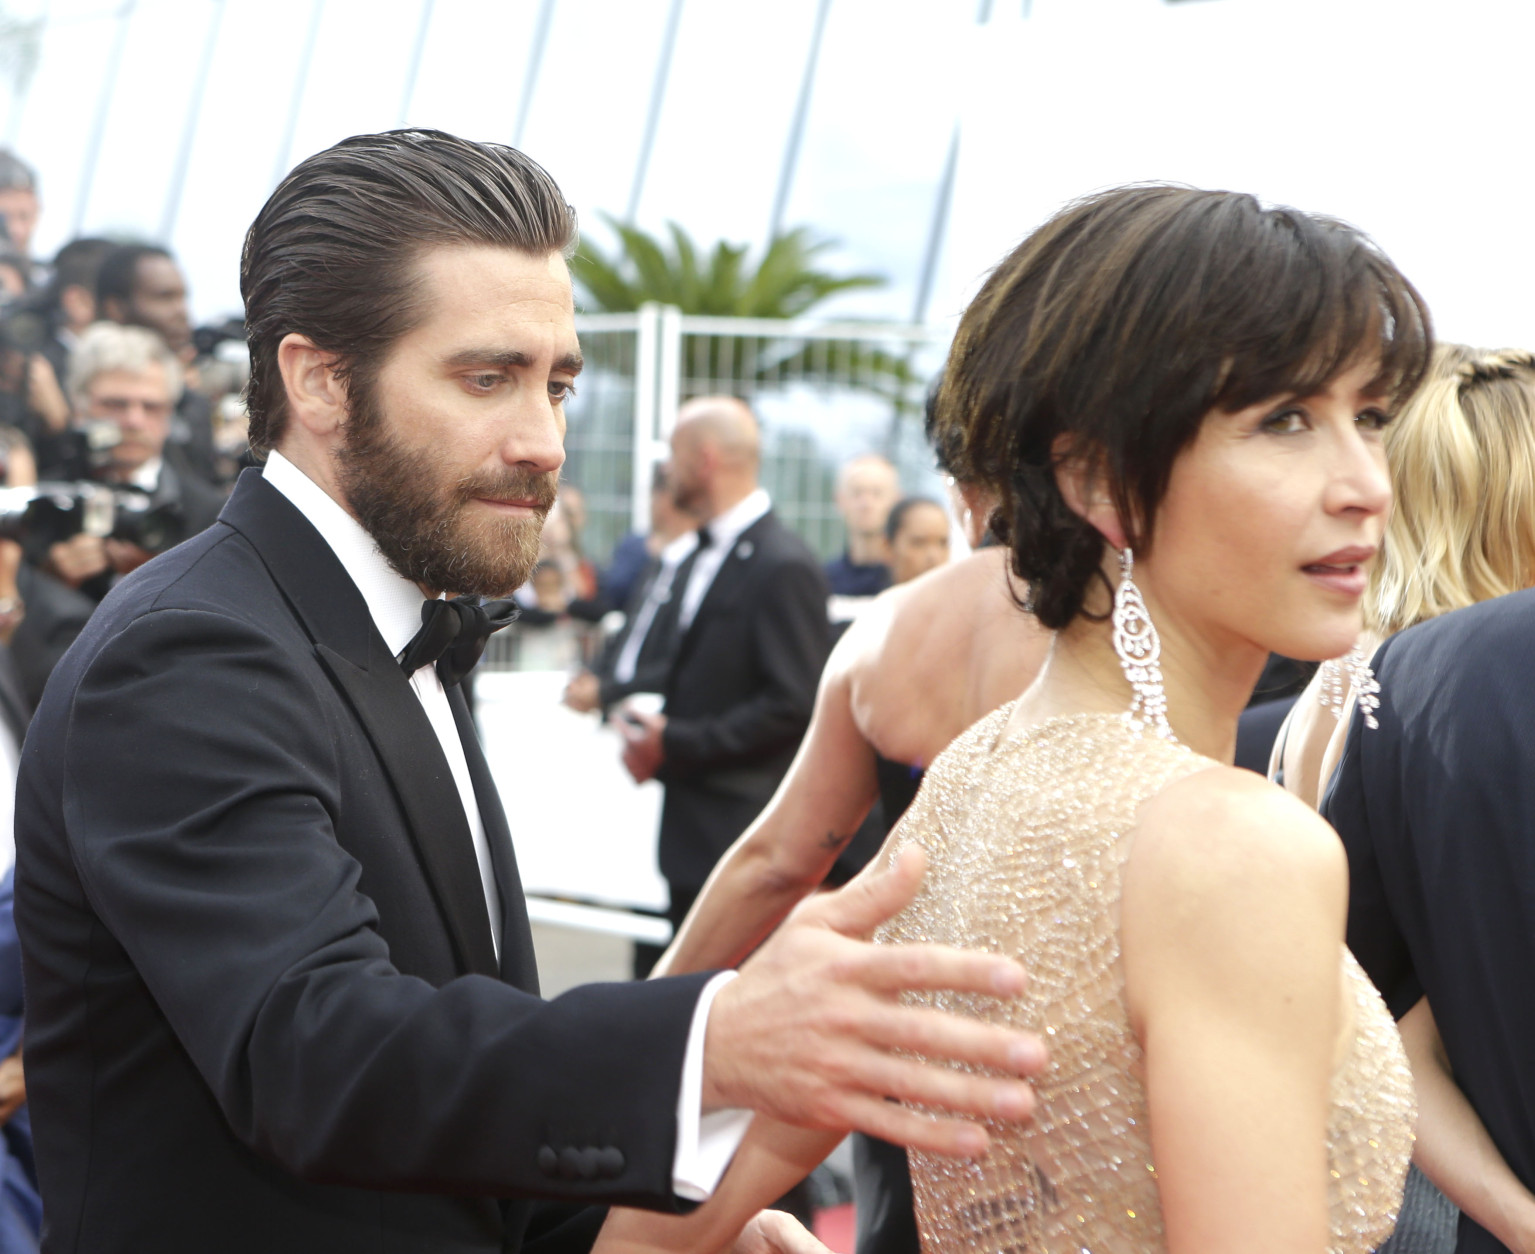 Jake Gyllenhaal and Sienna Miller pose for photographers upon arrival for the awards ceremony at the 68th international film festival, Cannes, southern France, Sunday, May 24, 2015. (AP Photo/Lionel Cironneau)